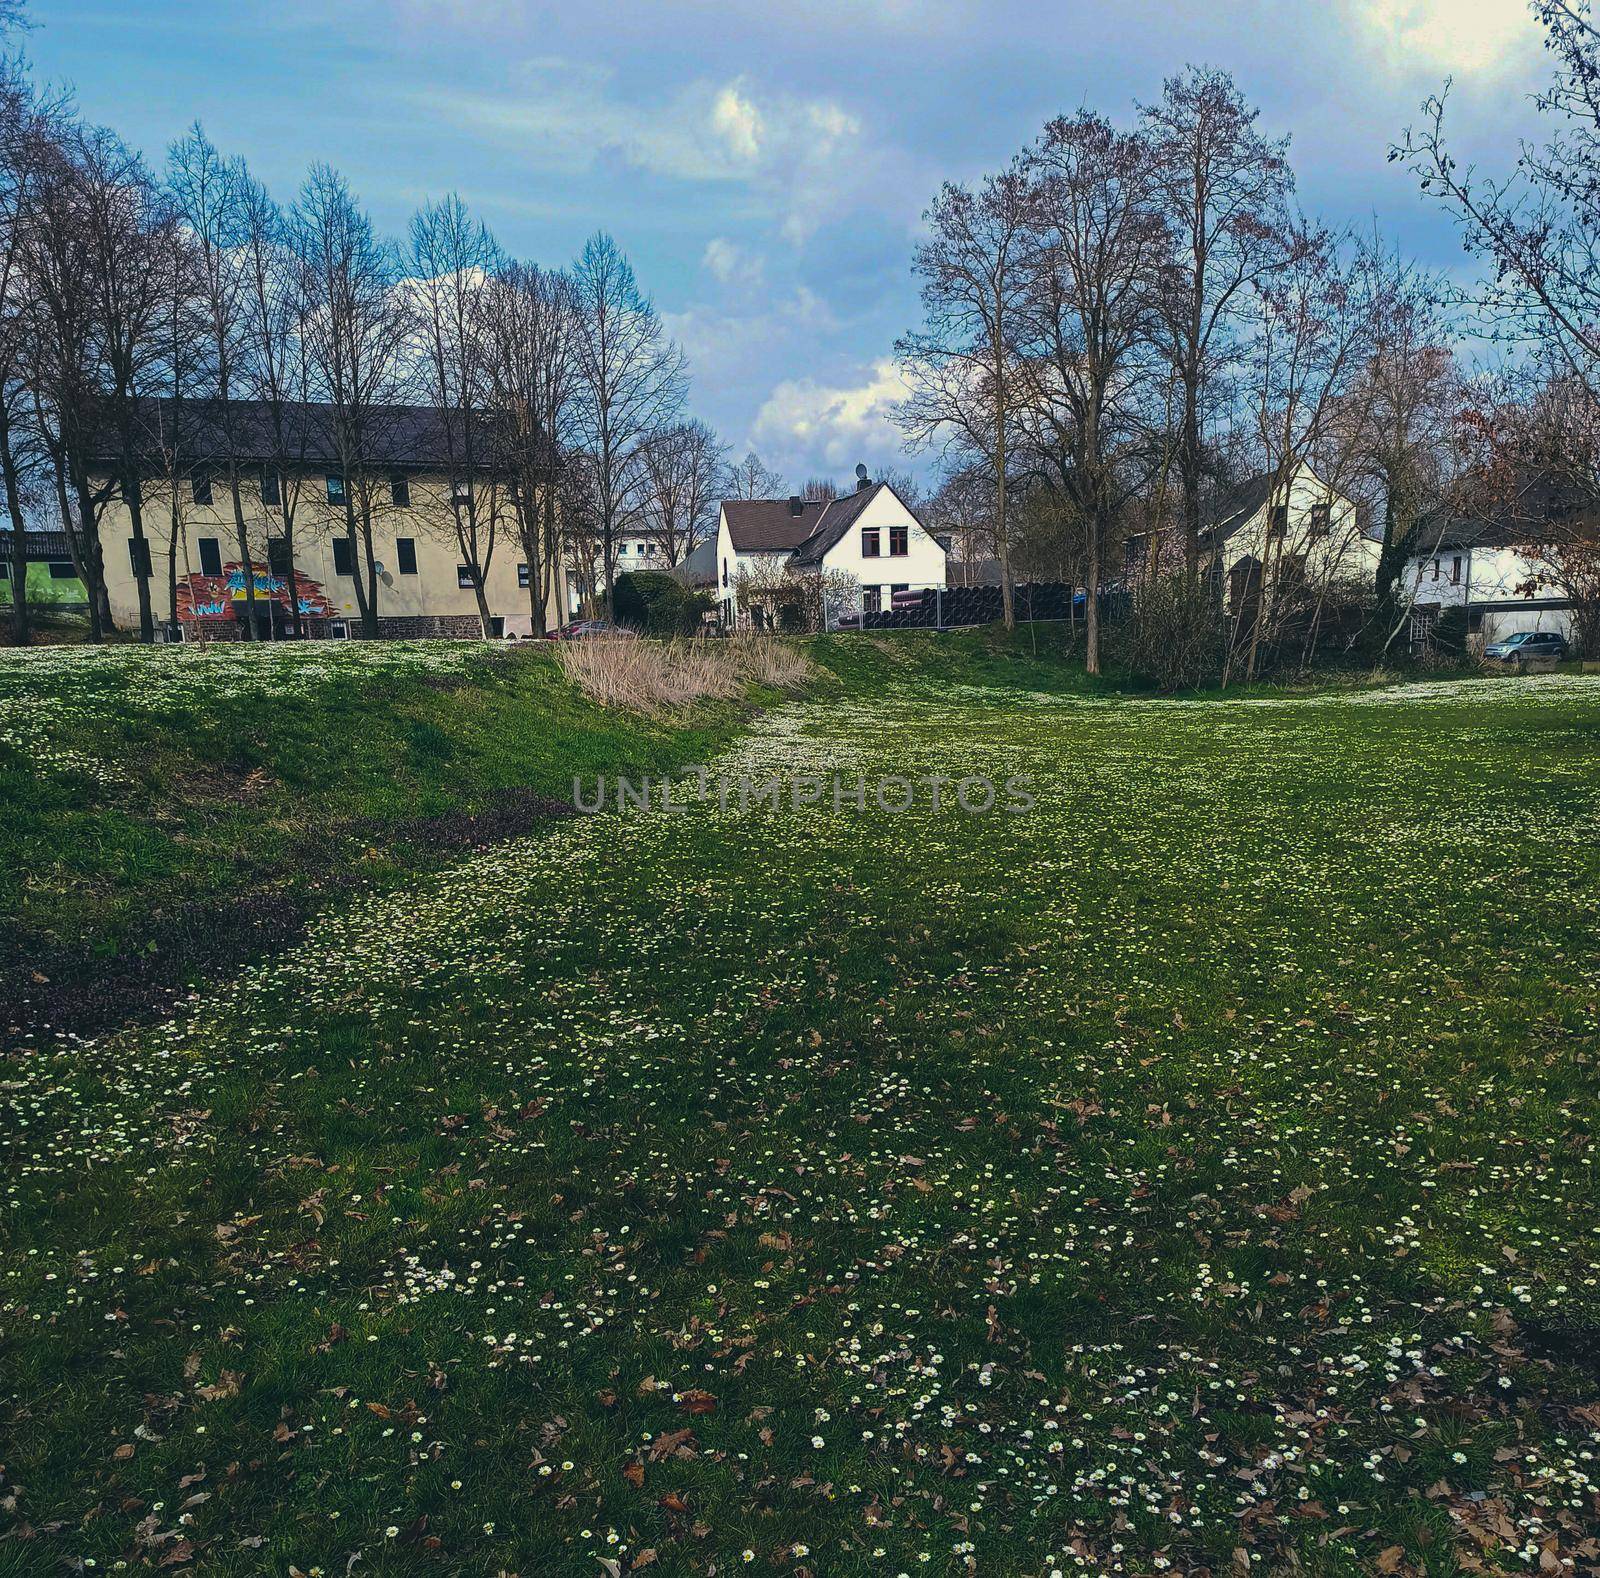 Small houses visible in the park. Green lawns in Germany.